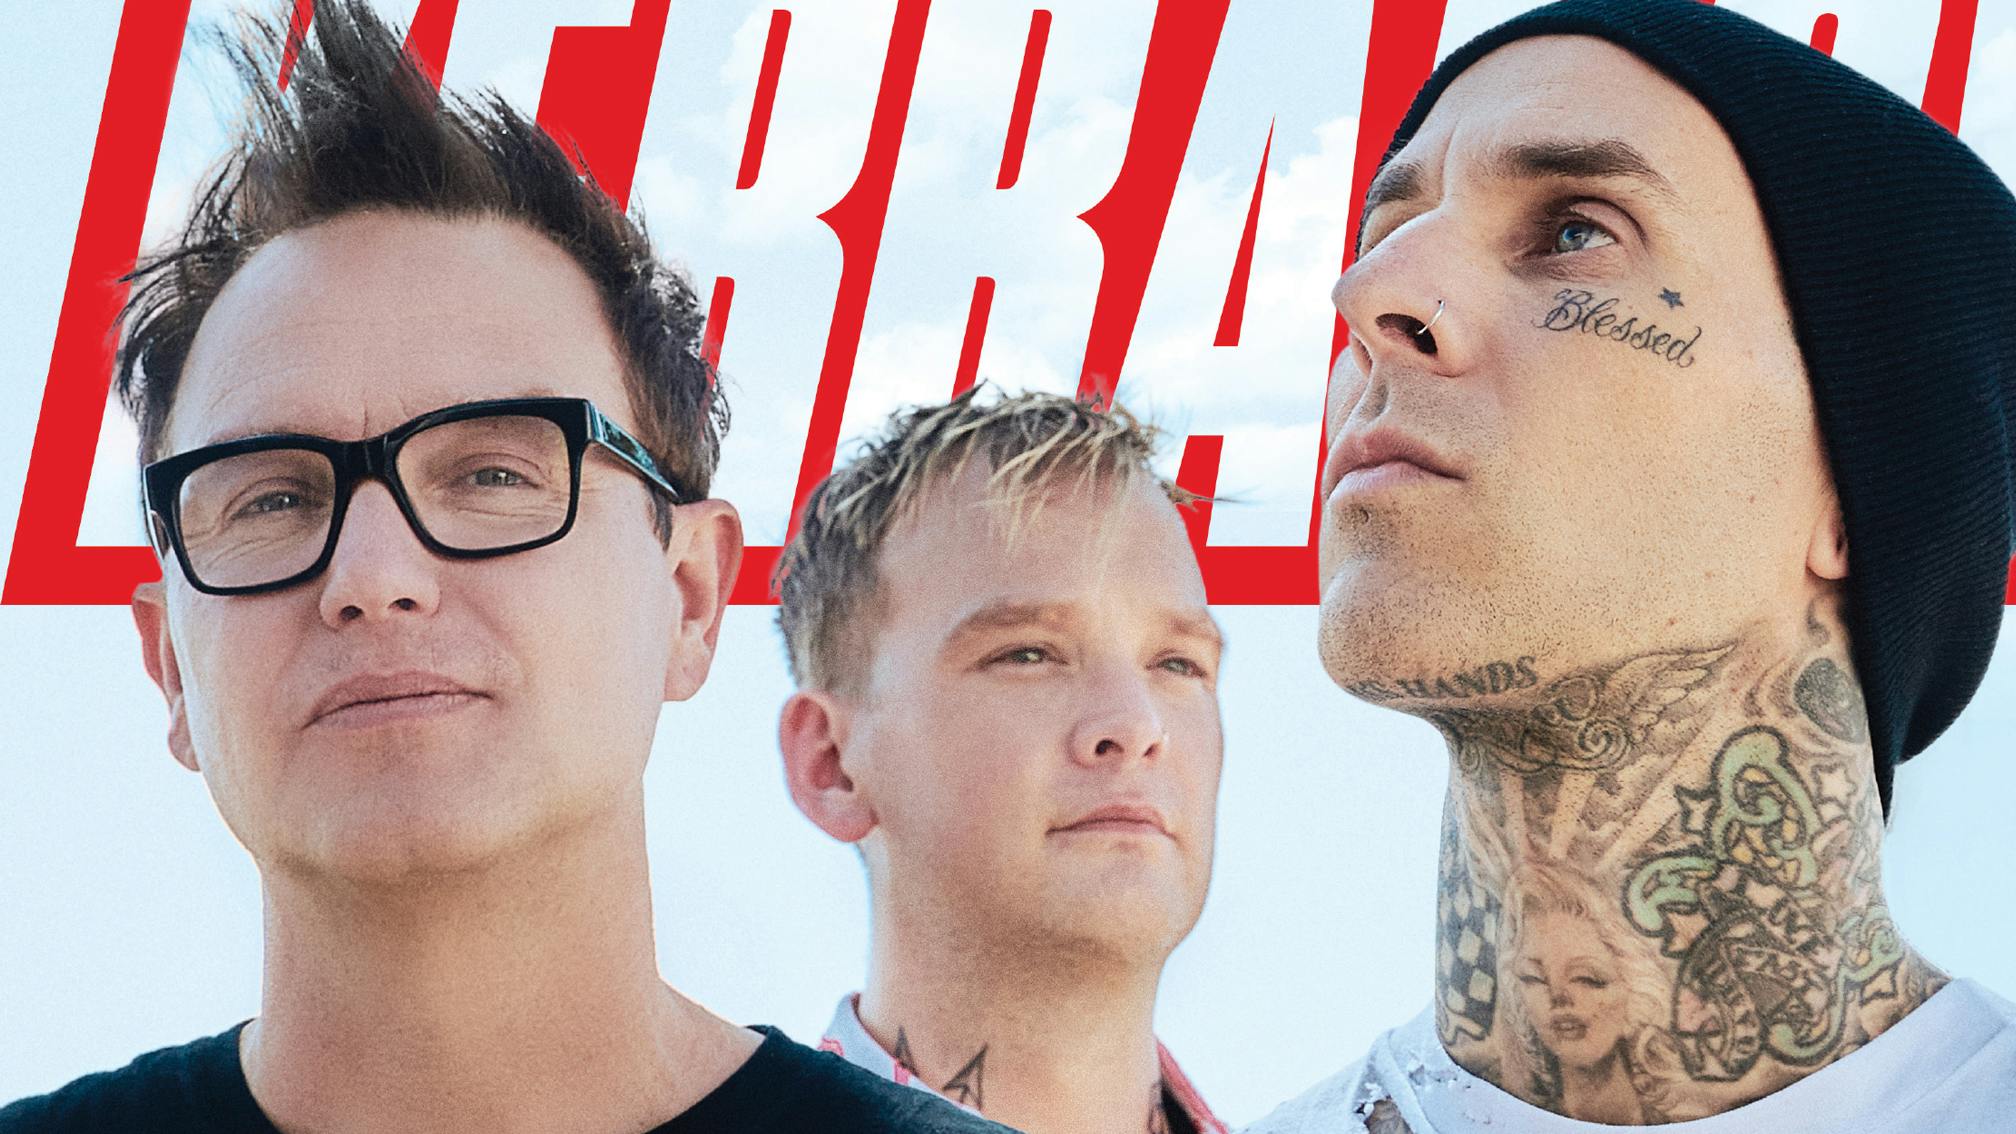 blink-182: "People Don't Want A Story – They Want The Truth…"